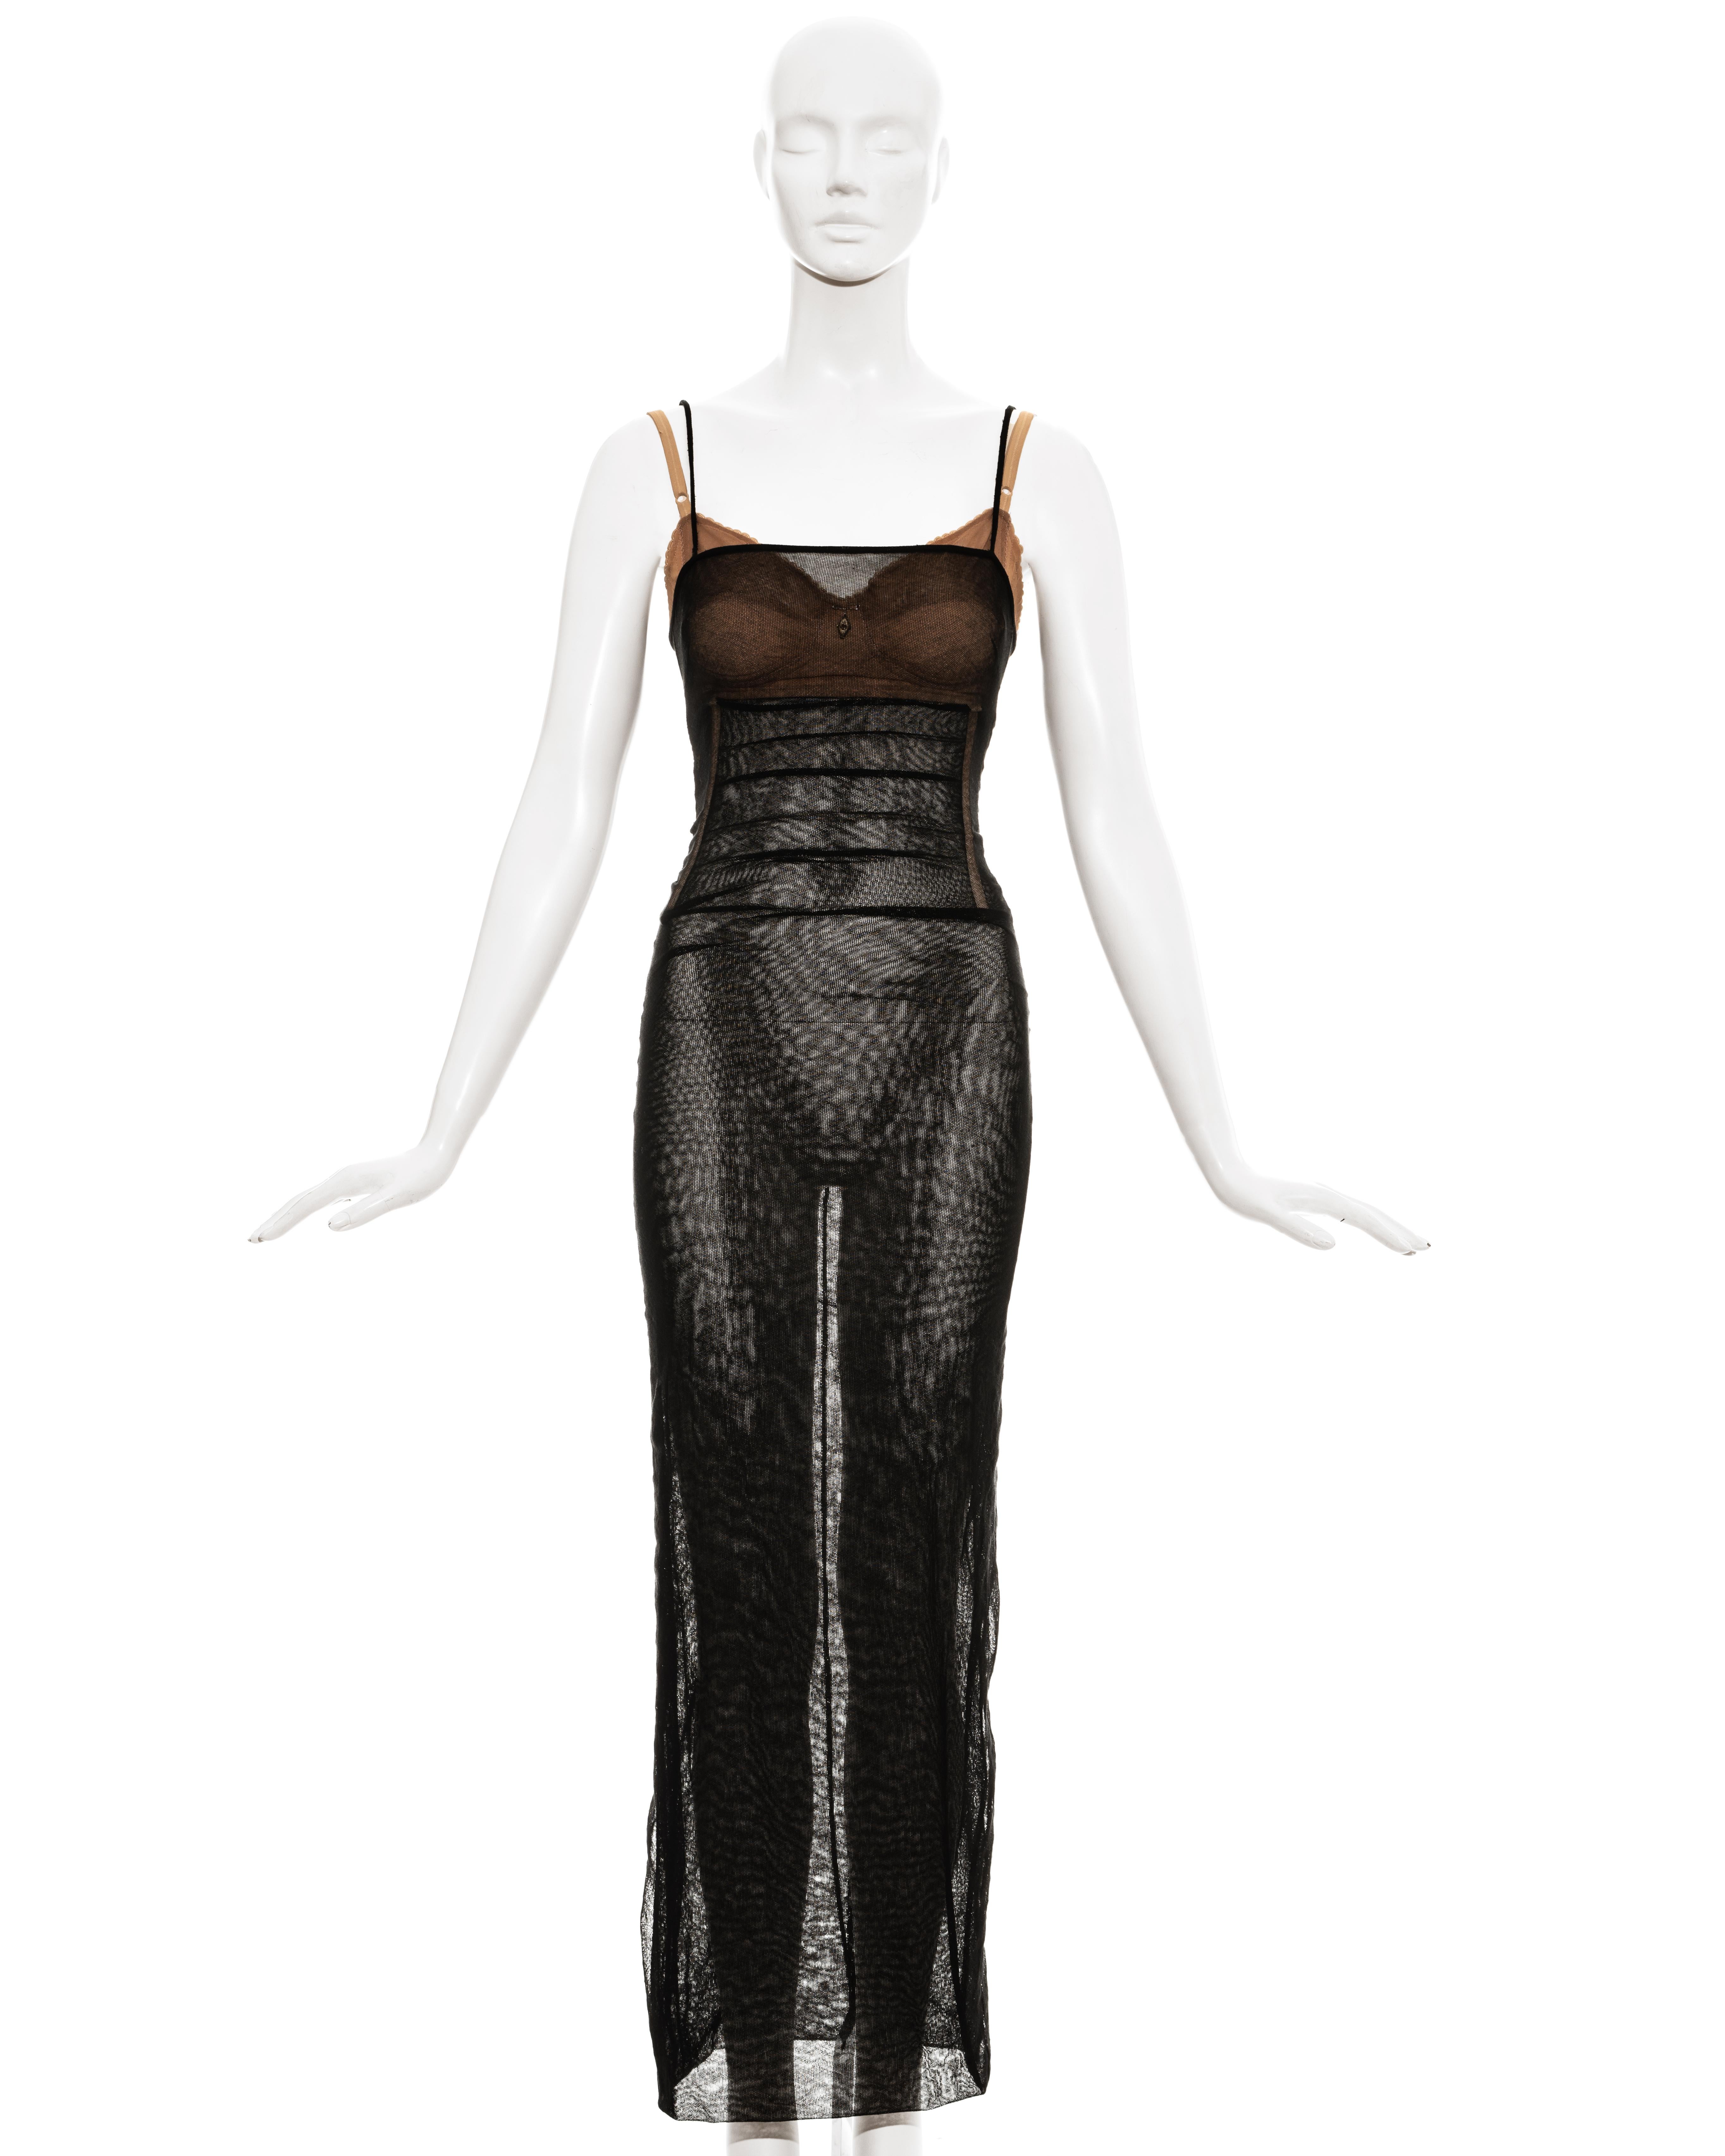 Dolce & Gabbana black silk nylon mesh corseted evening dress with built-in nude bra, ruched bodice with internal boning and back zip fastening. 

Spring-Summer 1998